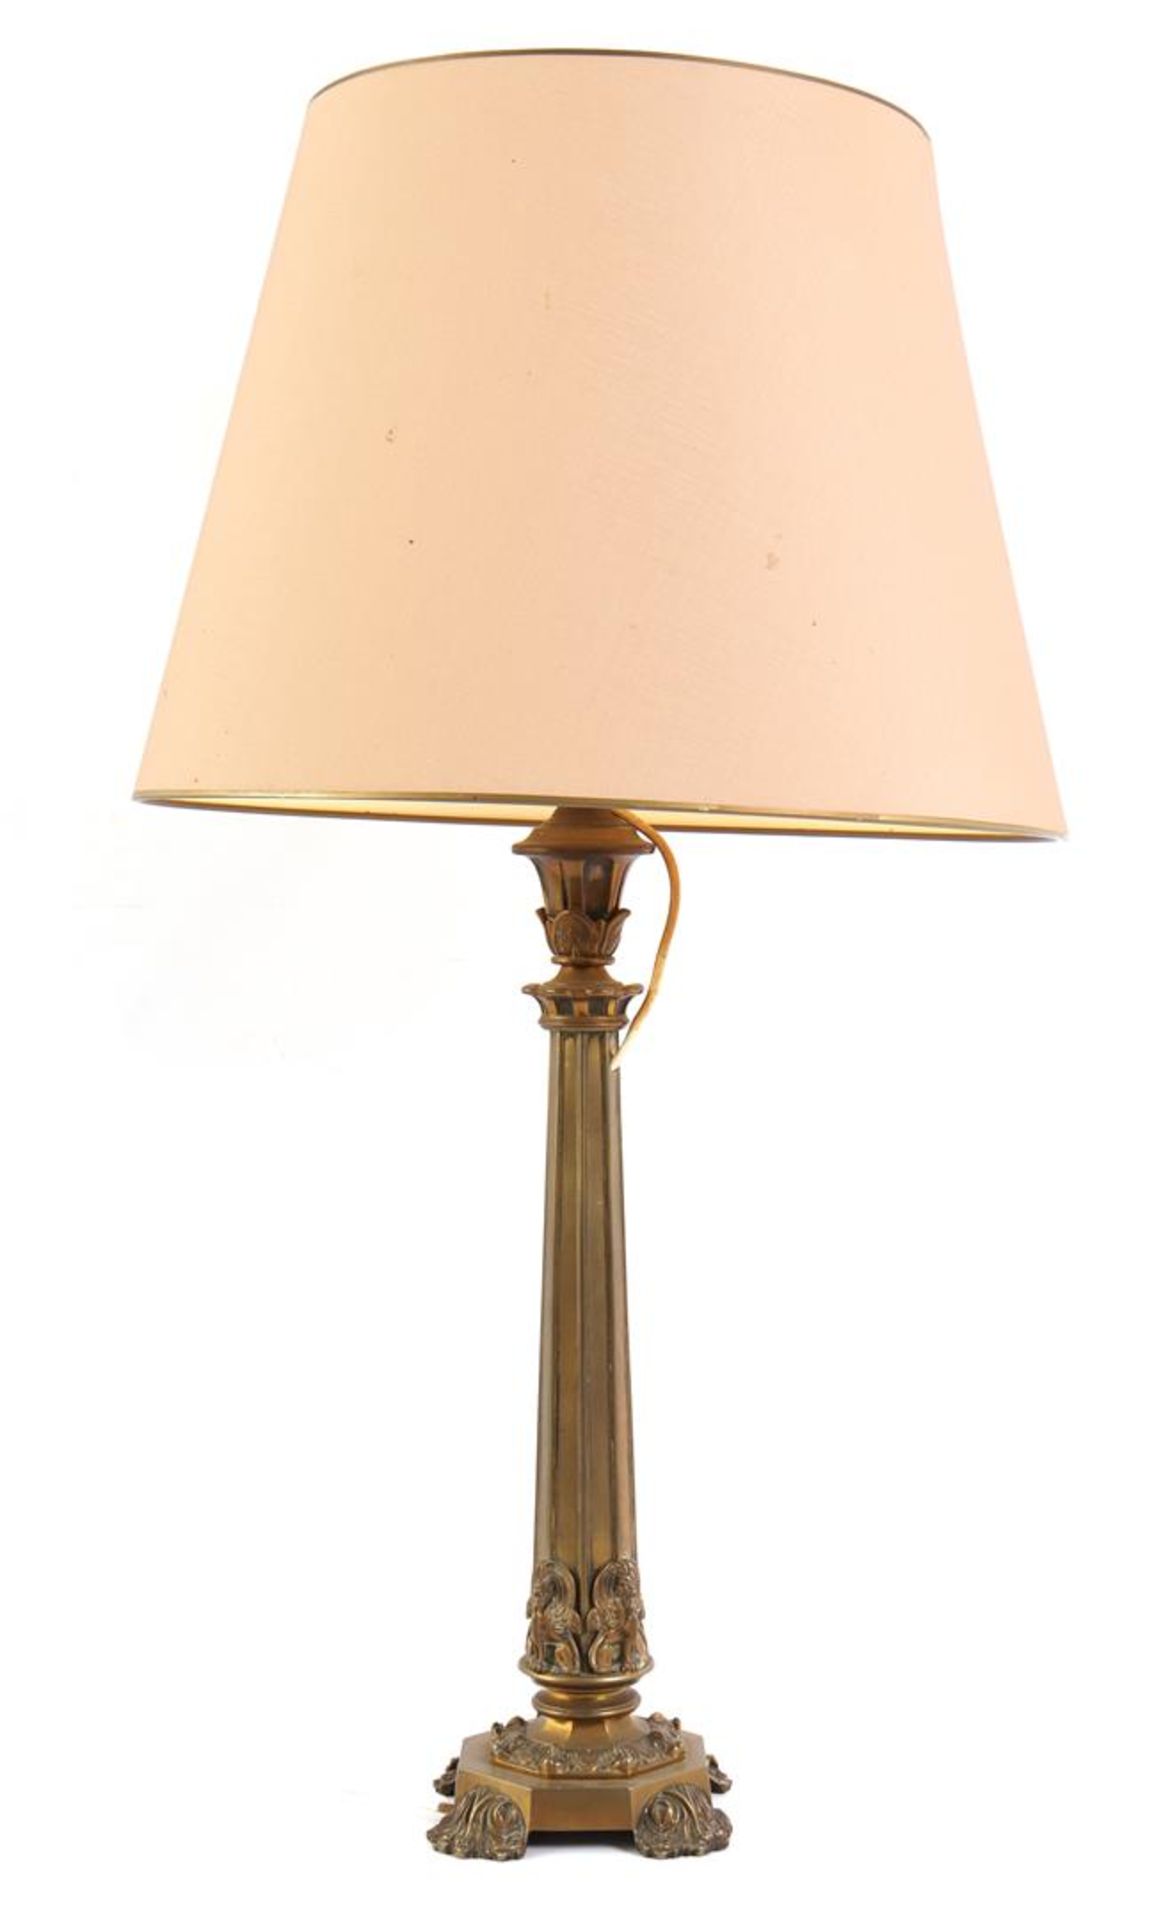 Classic brass table lamp